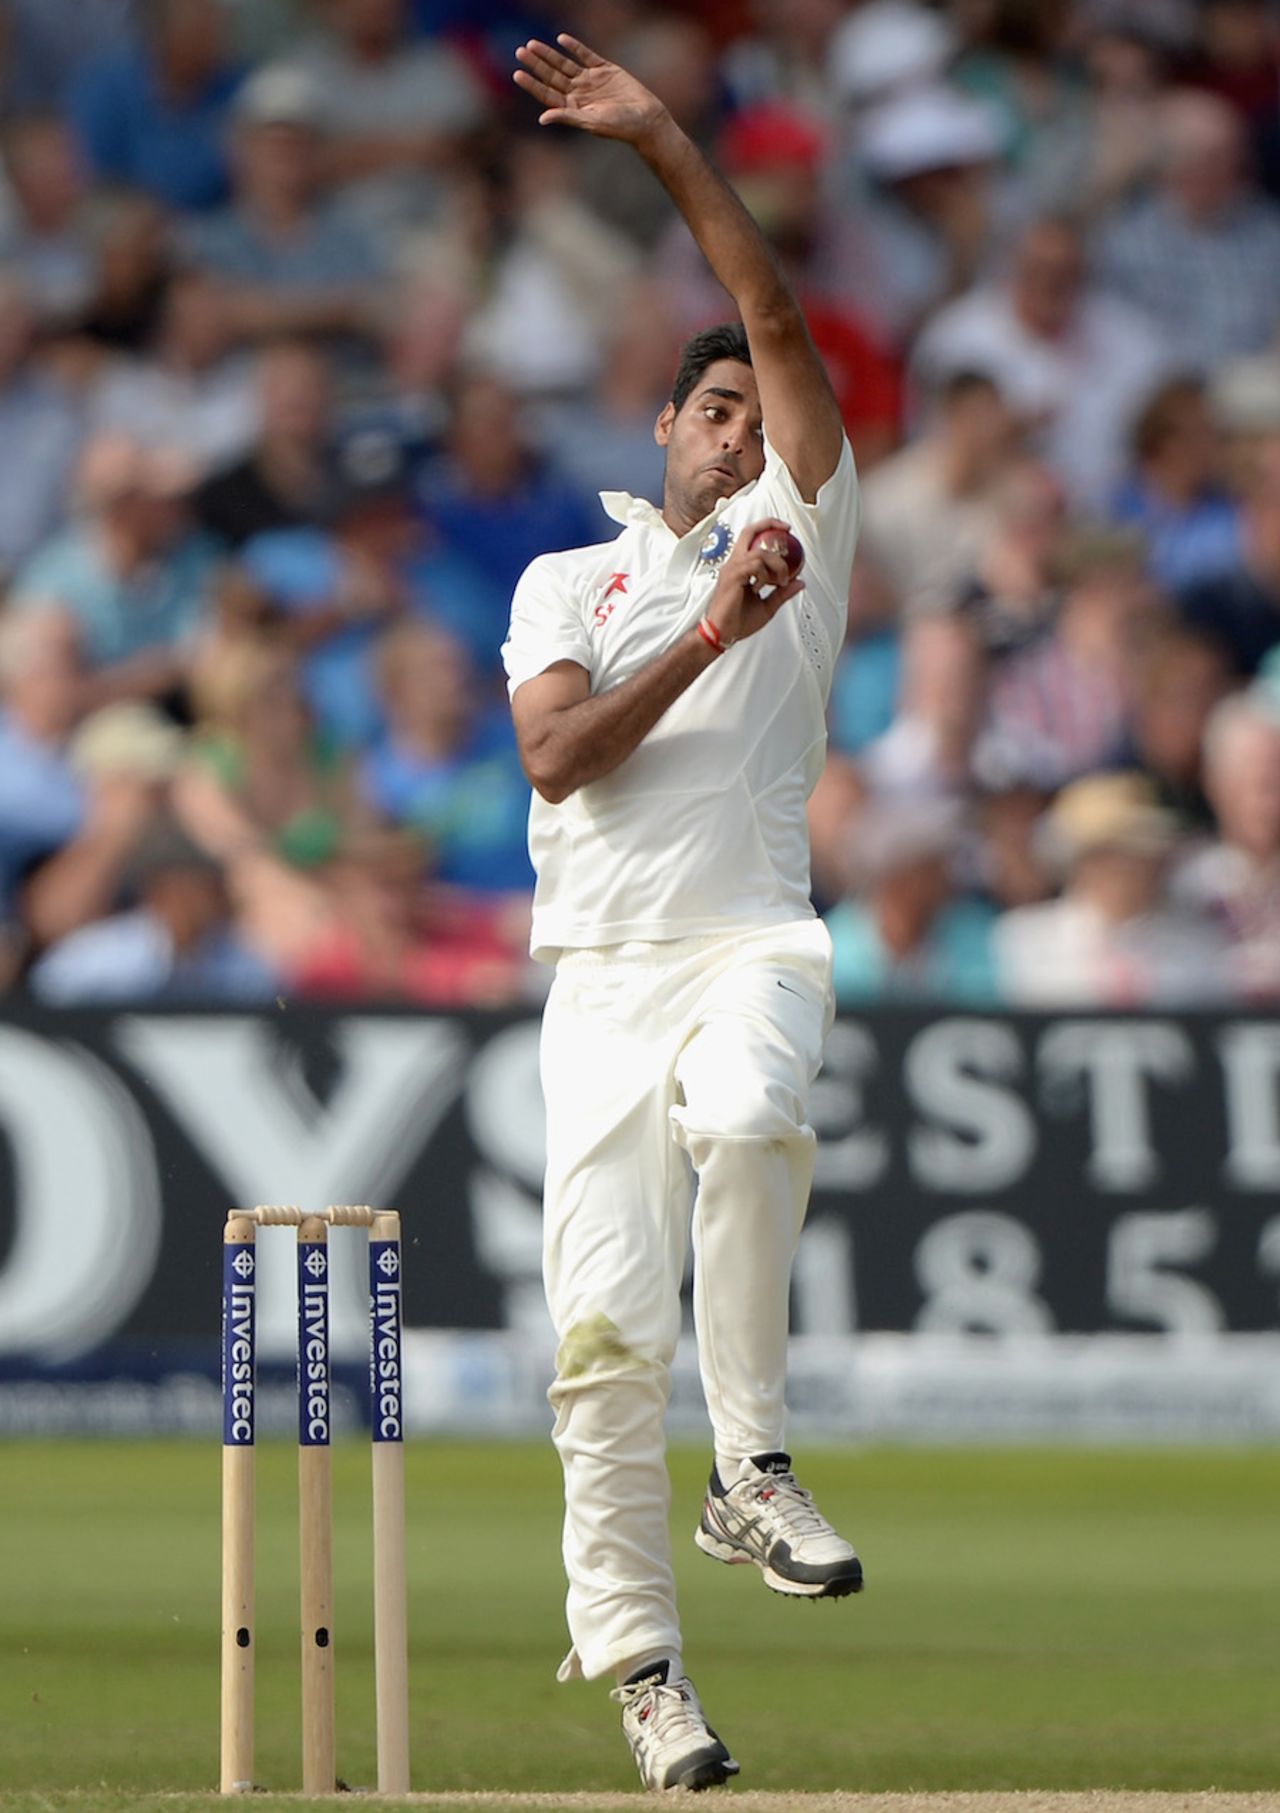 Bhuvneshwar Kumar in his delivery stride, England v India, 2nd Investec Test, Lord's, 2nd day, July 18, 2014